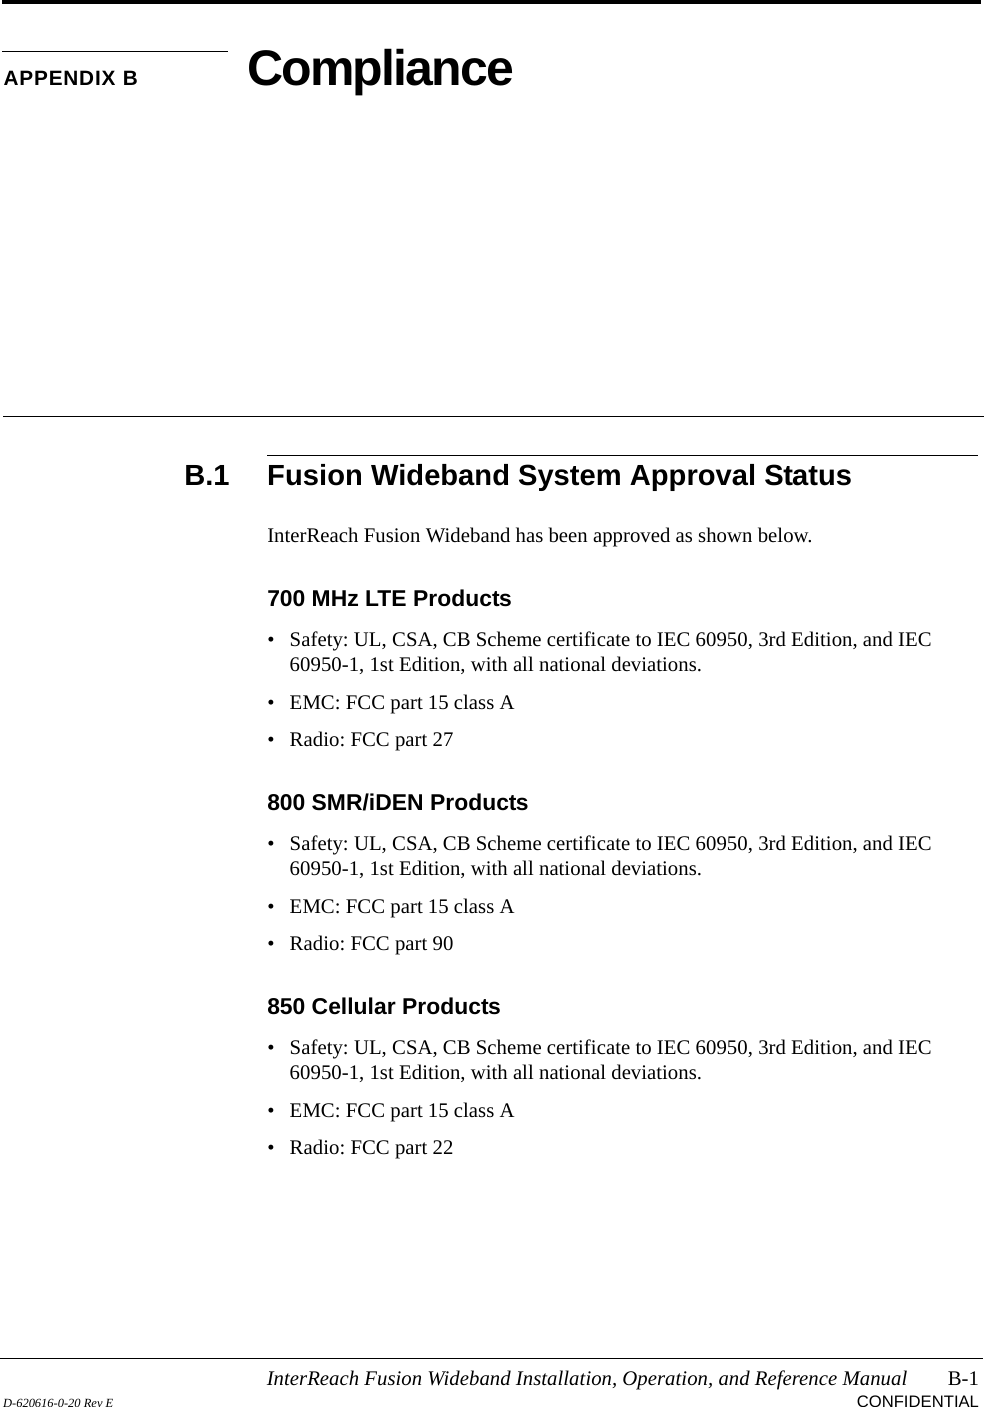 InterReach Fusion Wideband Installation, Operation, and Reference Manual B-1D-620616-0-20 Rev E CONFIDENTIALAPPENDIX B ComplianceB.1 Fusion Wideband System Approval StatusInterReach Fusion Wideband has been approved as shown below.700 MHz LTE Products• Safety: UL, CSA, CB Scheme certificate to IEC 60950, 3rd Edition, and IEC 60950-1, 1st Edition, with all national deviations.• EMC: FCC part 15 class A• Radio: FCC part 27800 SMR/iDEN Products• Safety: UL, CSA, CB Scheme certificate to IEC 60950, 3rd Edition, and IEC 60950-1, 1st Edition, with all national deviations.• EMC: FCC part 15 class A• Radio: FCC part 90850 Cellular Products• Safety: UL, CSA, CB Scheme certificate to IEC 60950, 3rd Edition, and IEC 60950-1, 1st Edition, with all national deviations.• EMC: FCC part 15 class A• Radio: FCC part 22